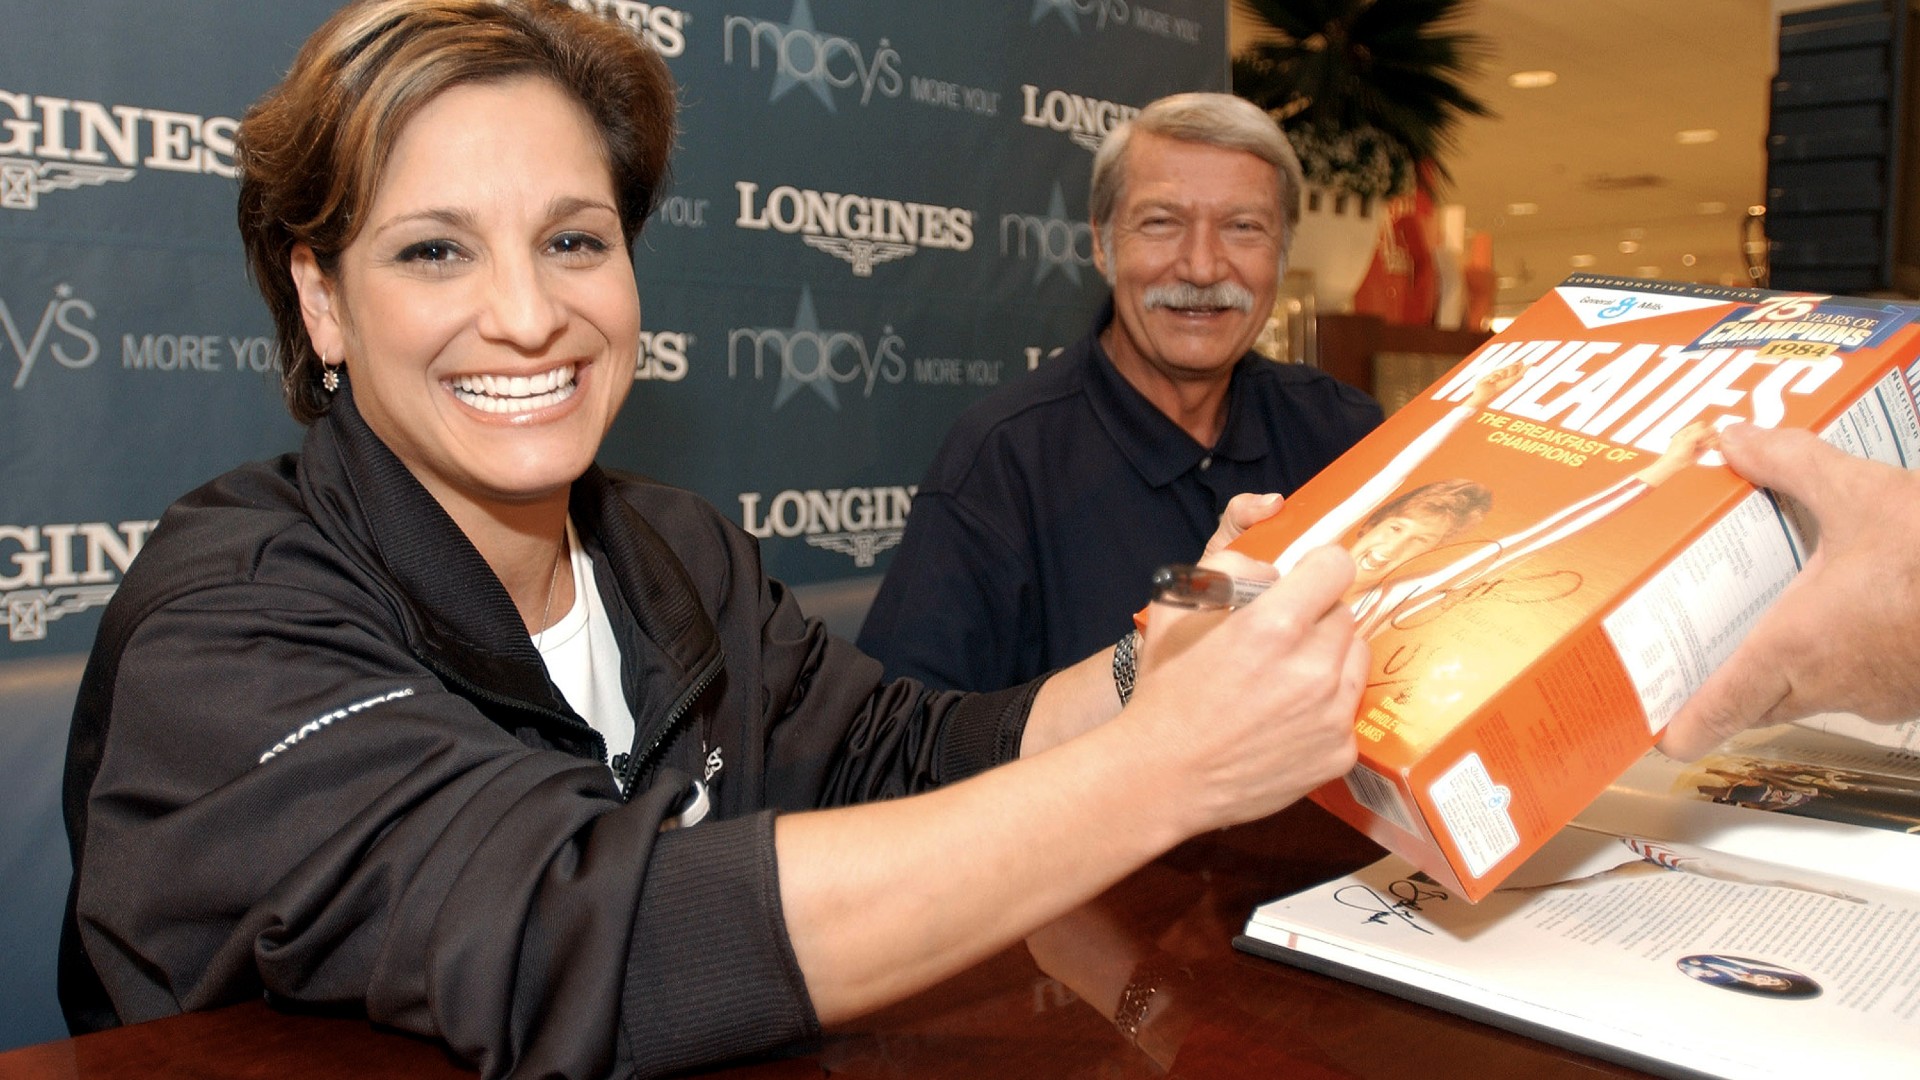 Mary Lou Retton speaks out amidst health struggles.